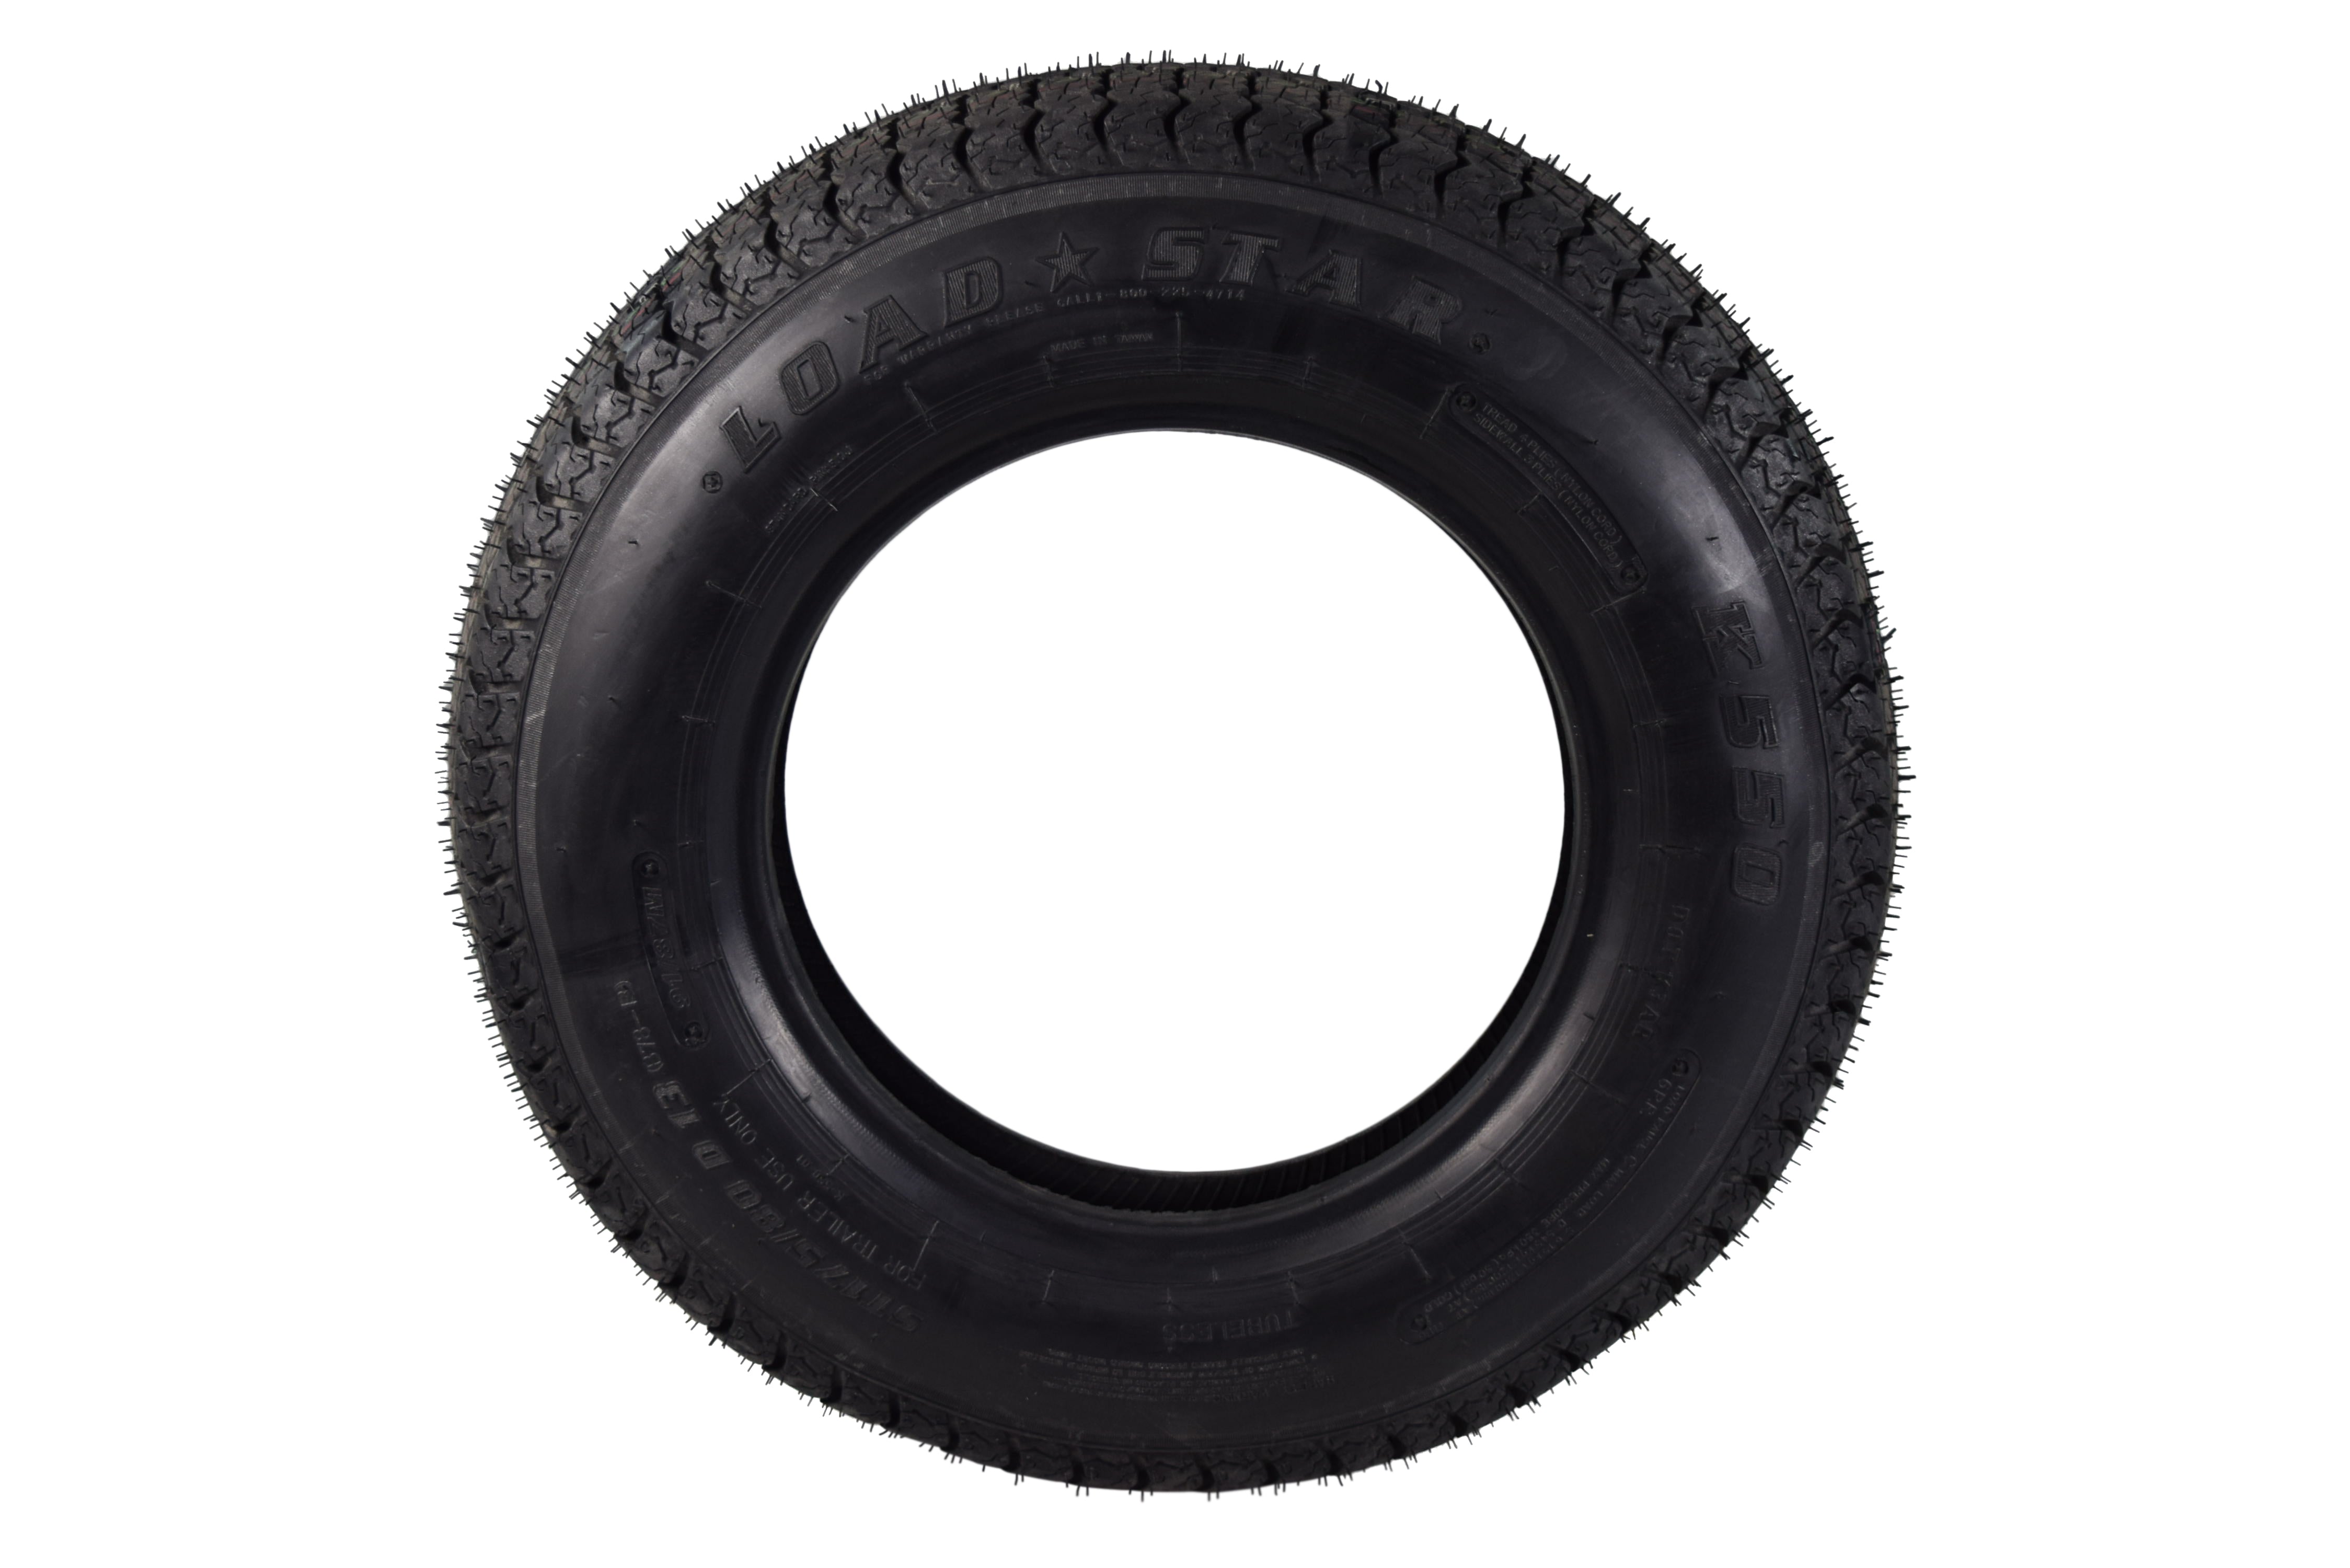 Kenda-31722002-ST175-80D13-Load-Star-6-Ply-Tubeless-Trailer-Tire-image-3